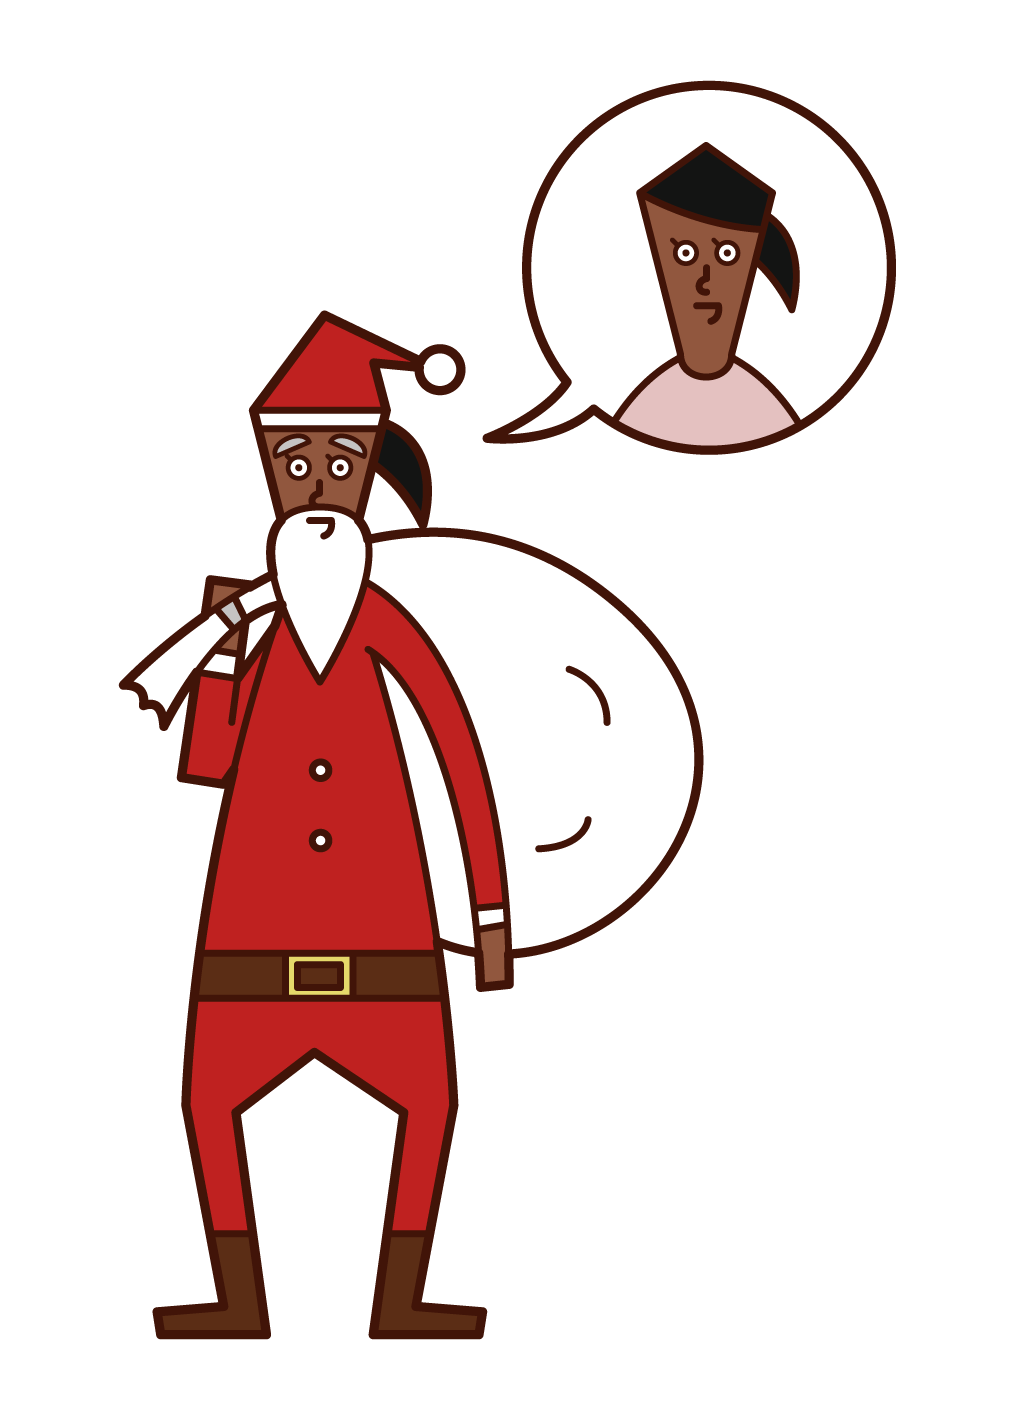 Illustration of Santa Claus (Woman) disguised by her mother